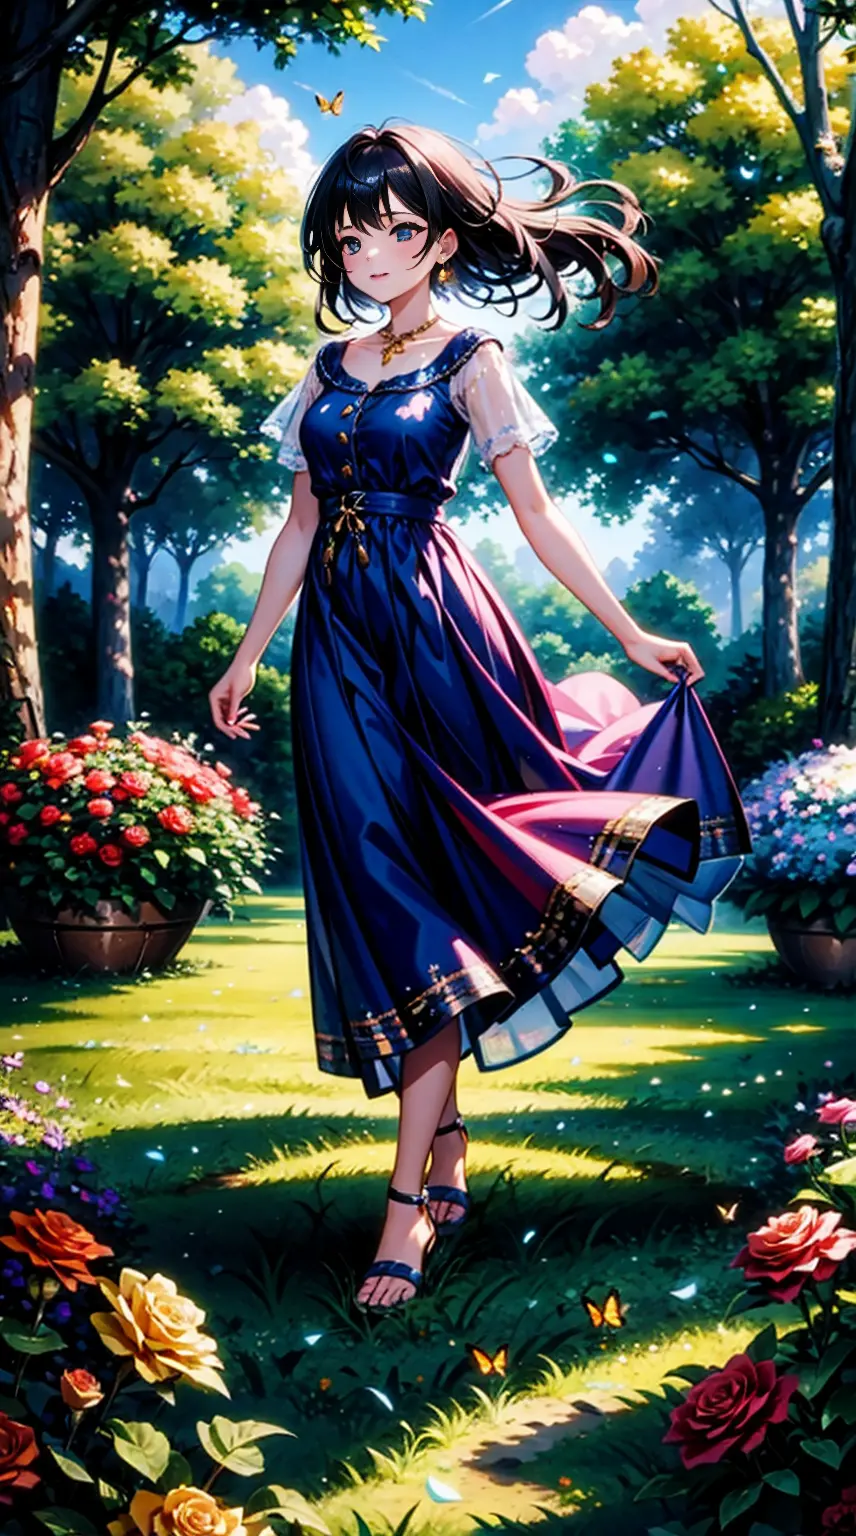 1 girl in a beautiful garden, vibrant flowers, sunlight filtering through trees, a soft breeze caressing her flowing dress. Her ...